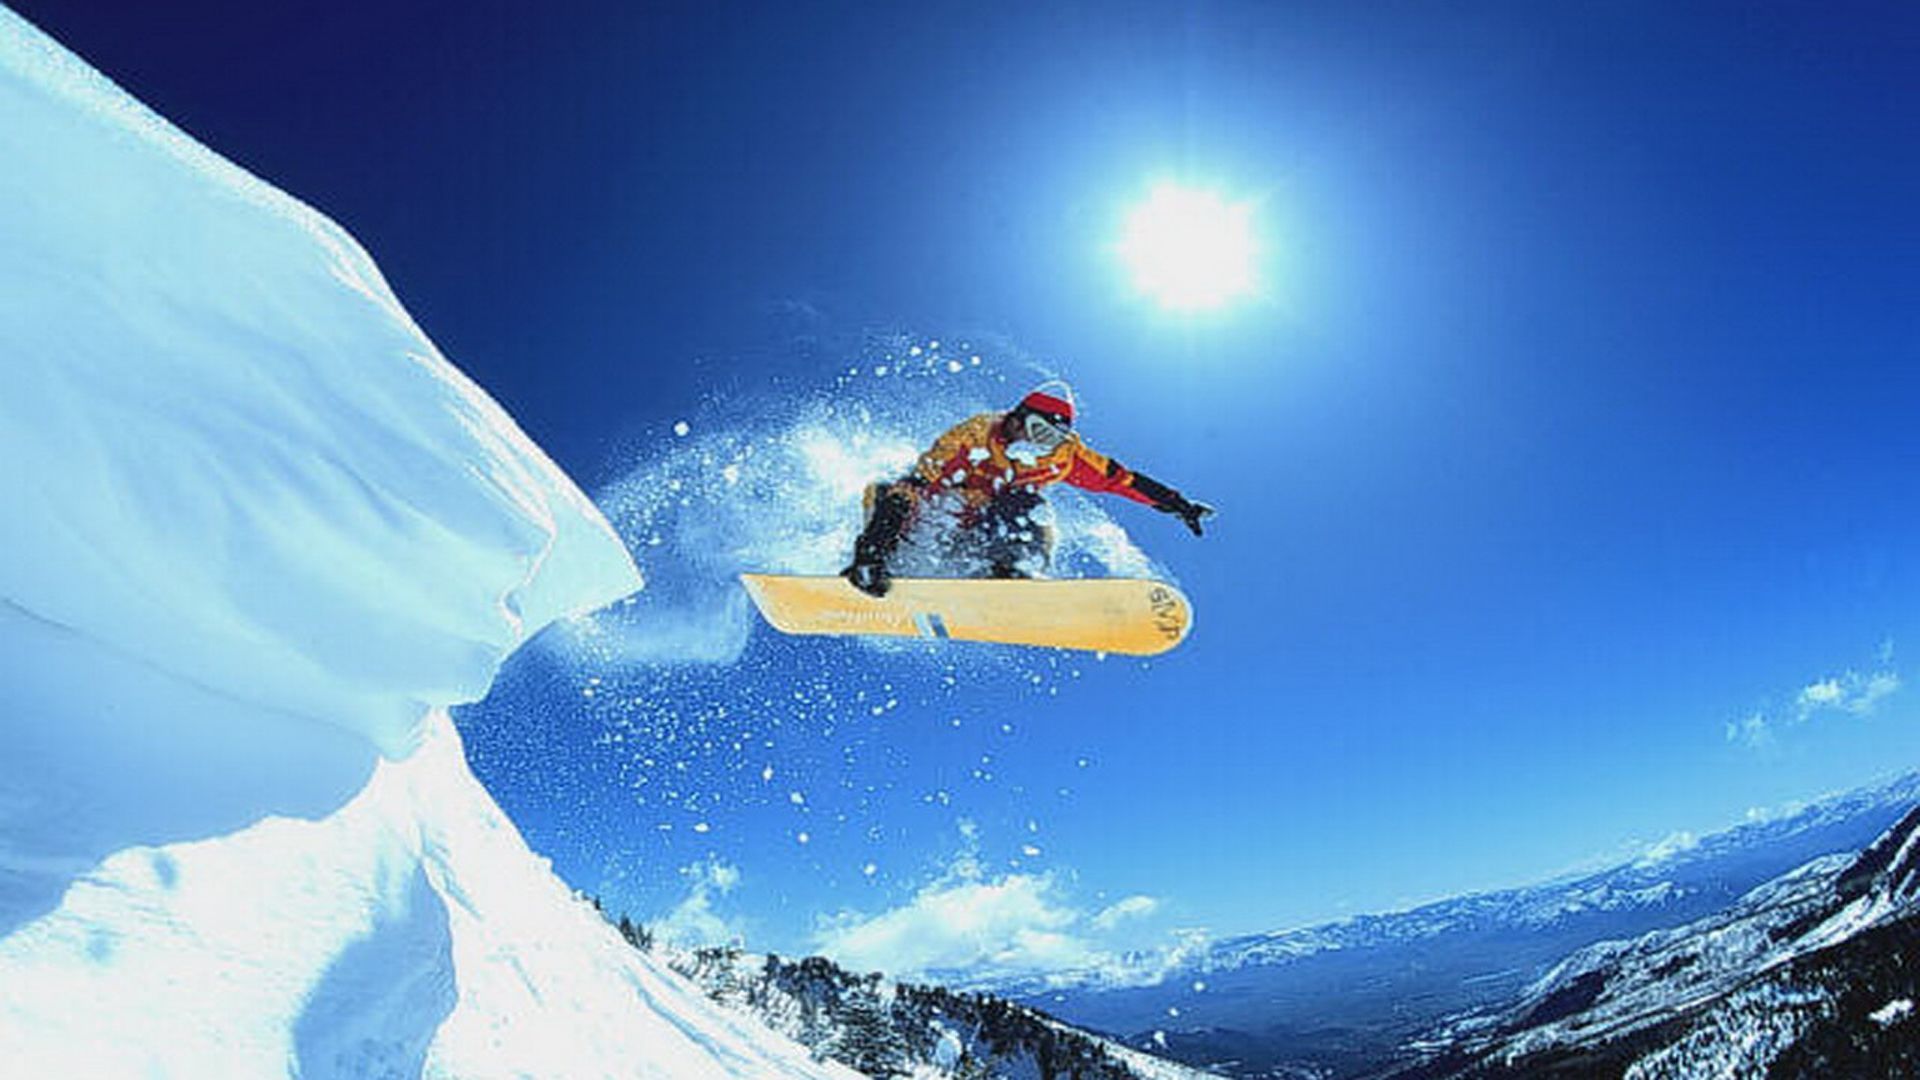 Hd Snowboarding Mountain Wallpaper High Resolution Free Download Images